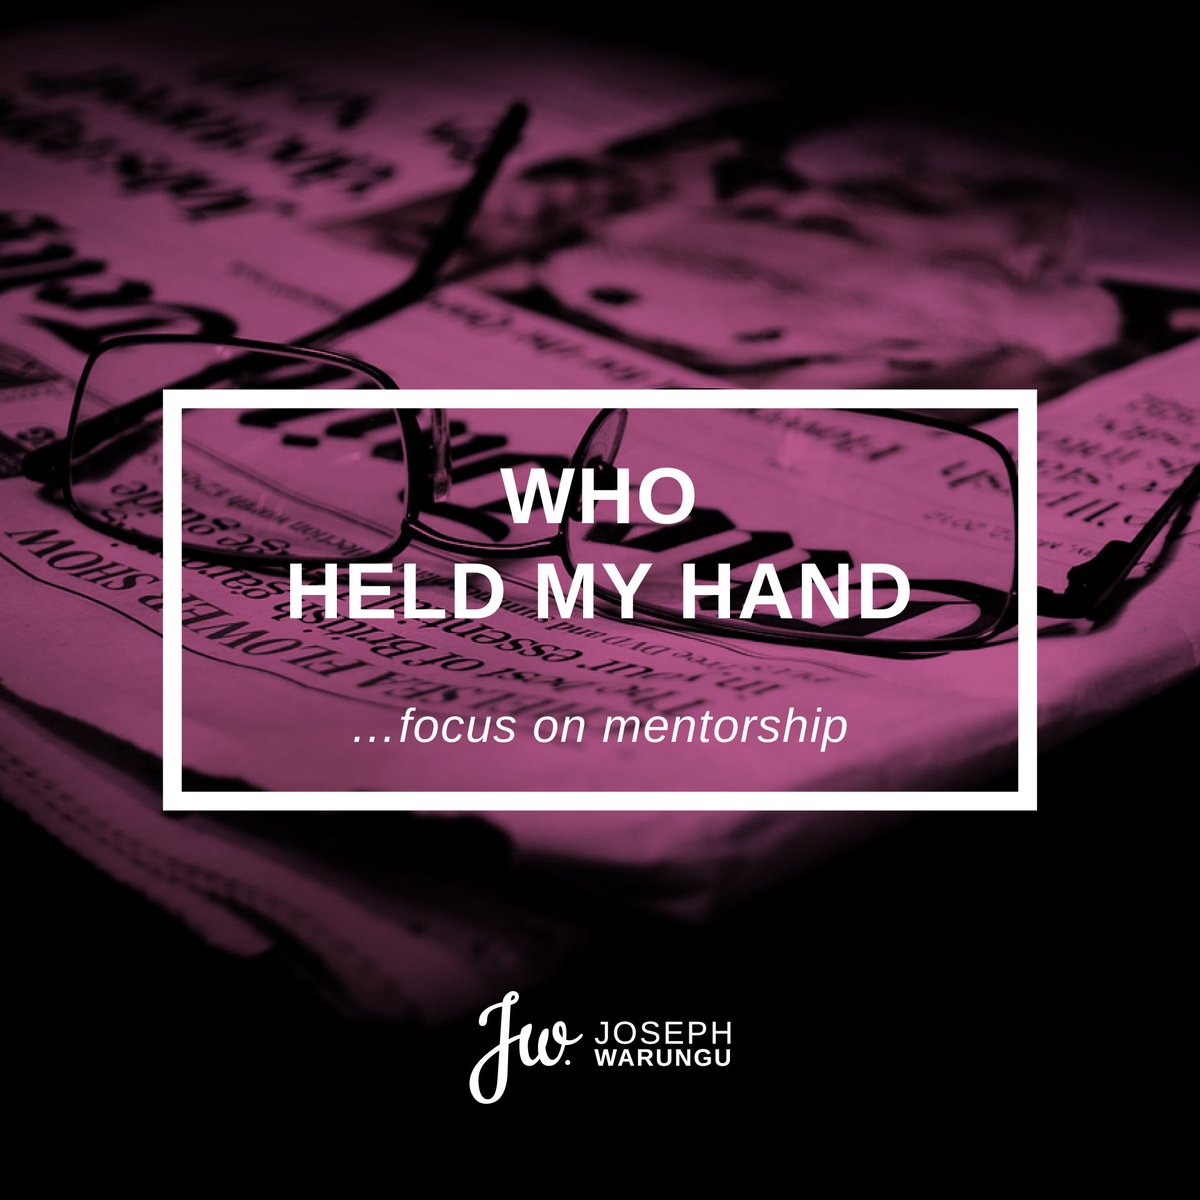 4. Do not despise a day of small beginnings, the journey to the peak of any mountain starts from the base, however rugged.5. You have a responsibility to take the risk and open doors for others, especially young people at the start of their career  #WhoHeldMyHand